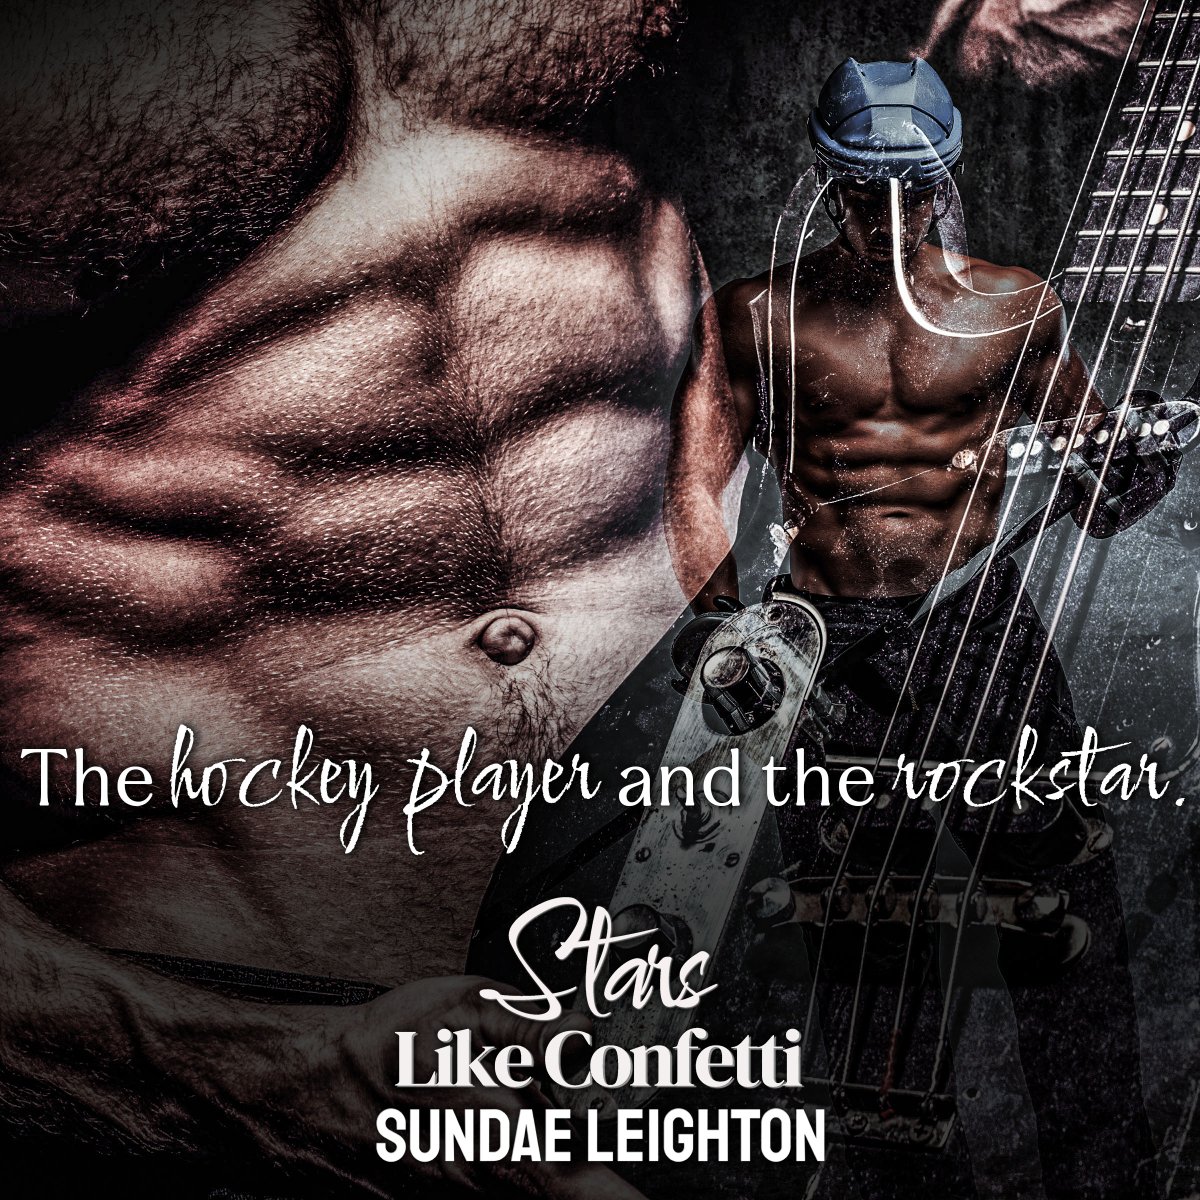 Stars like Confetti by @authorsundae_l is coming May 27th!

#Preorder: geni.us/slcevents

#MMRomance #Rockstar #Hockey #FriendstoLovers #HurtComfort @Chaotic_Creativ